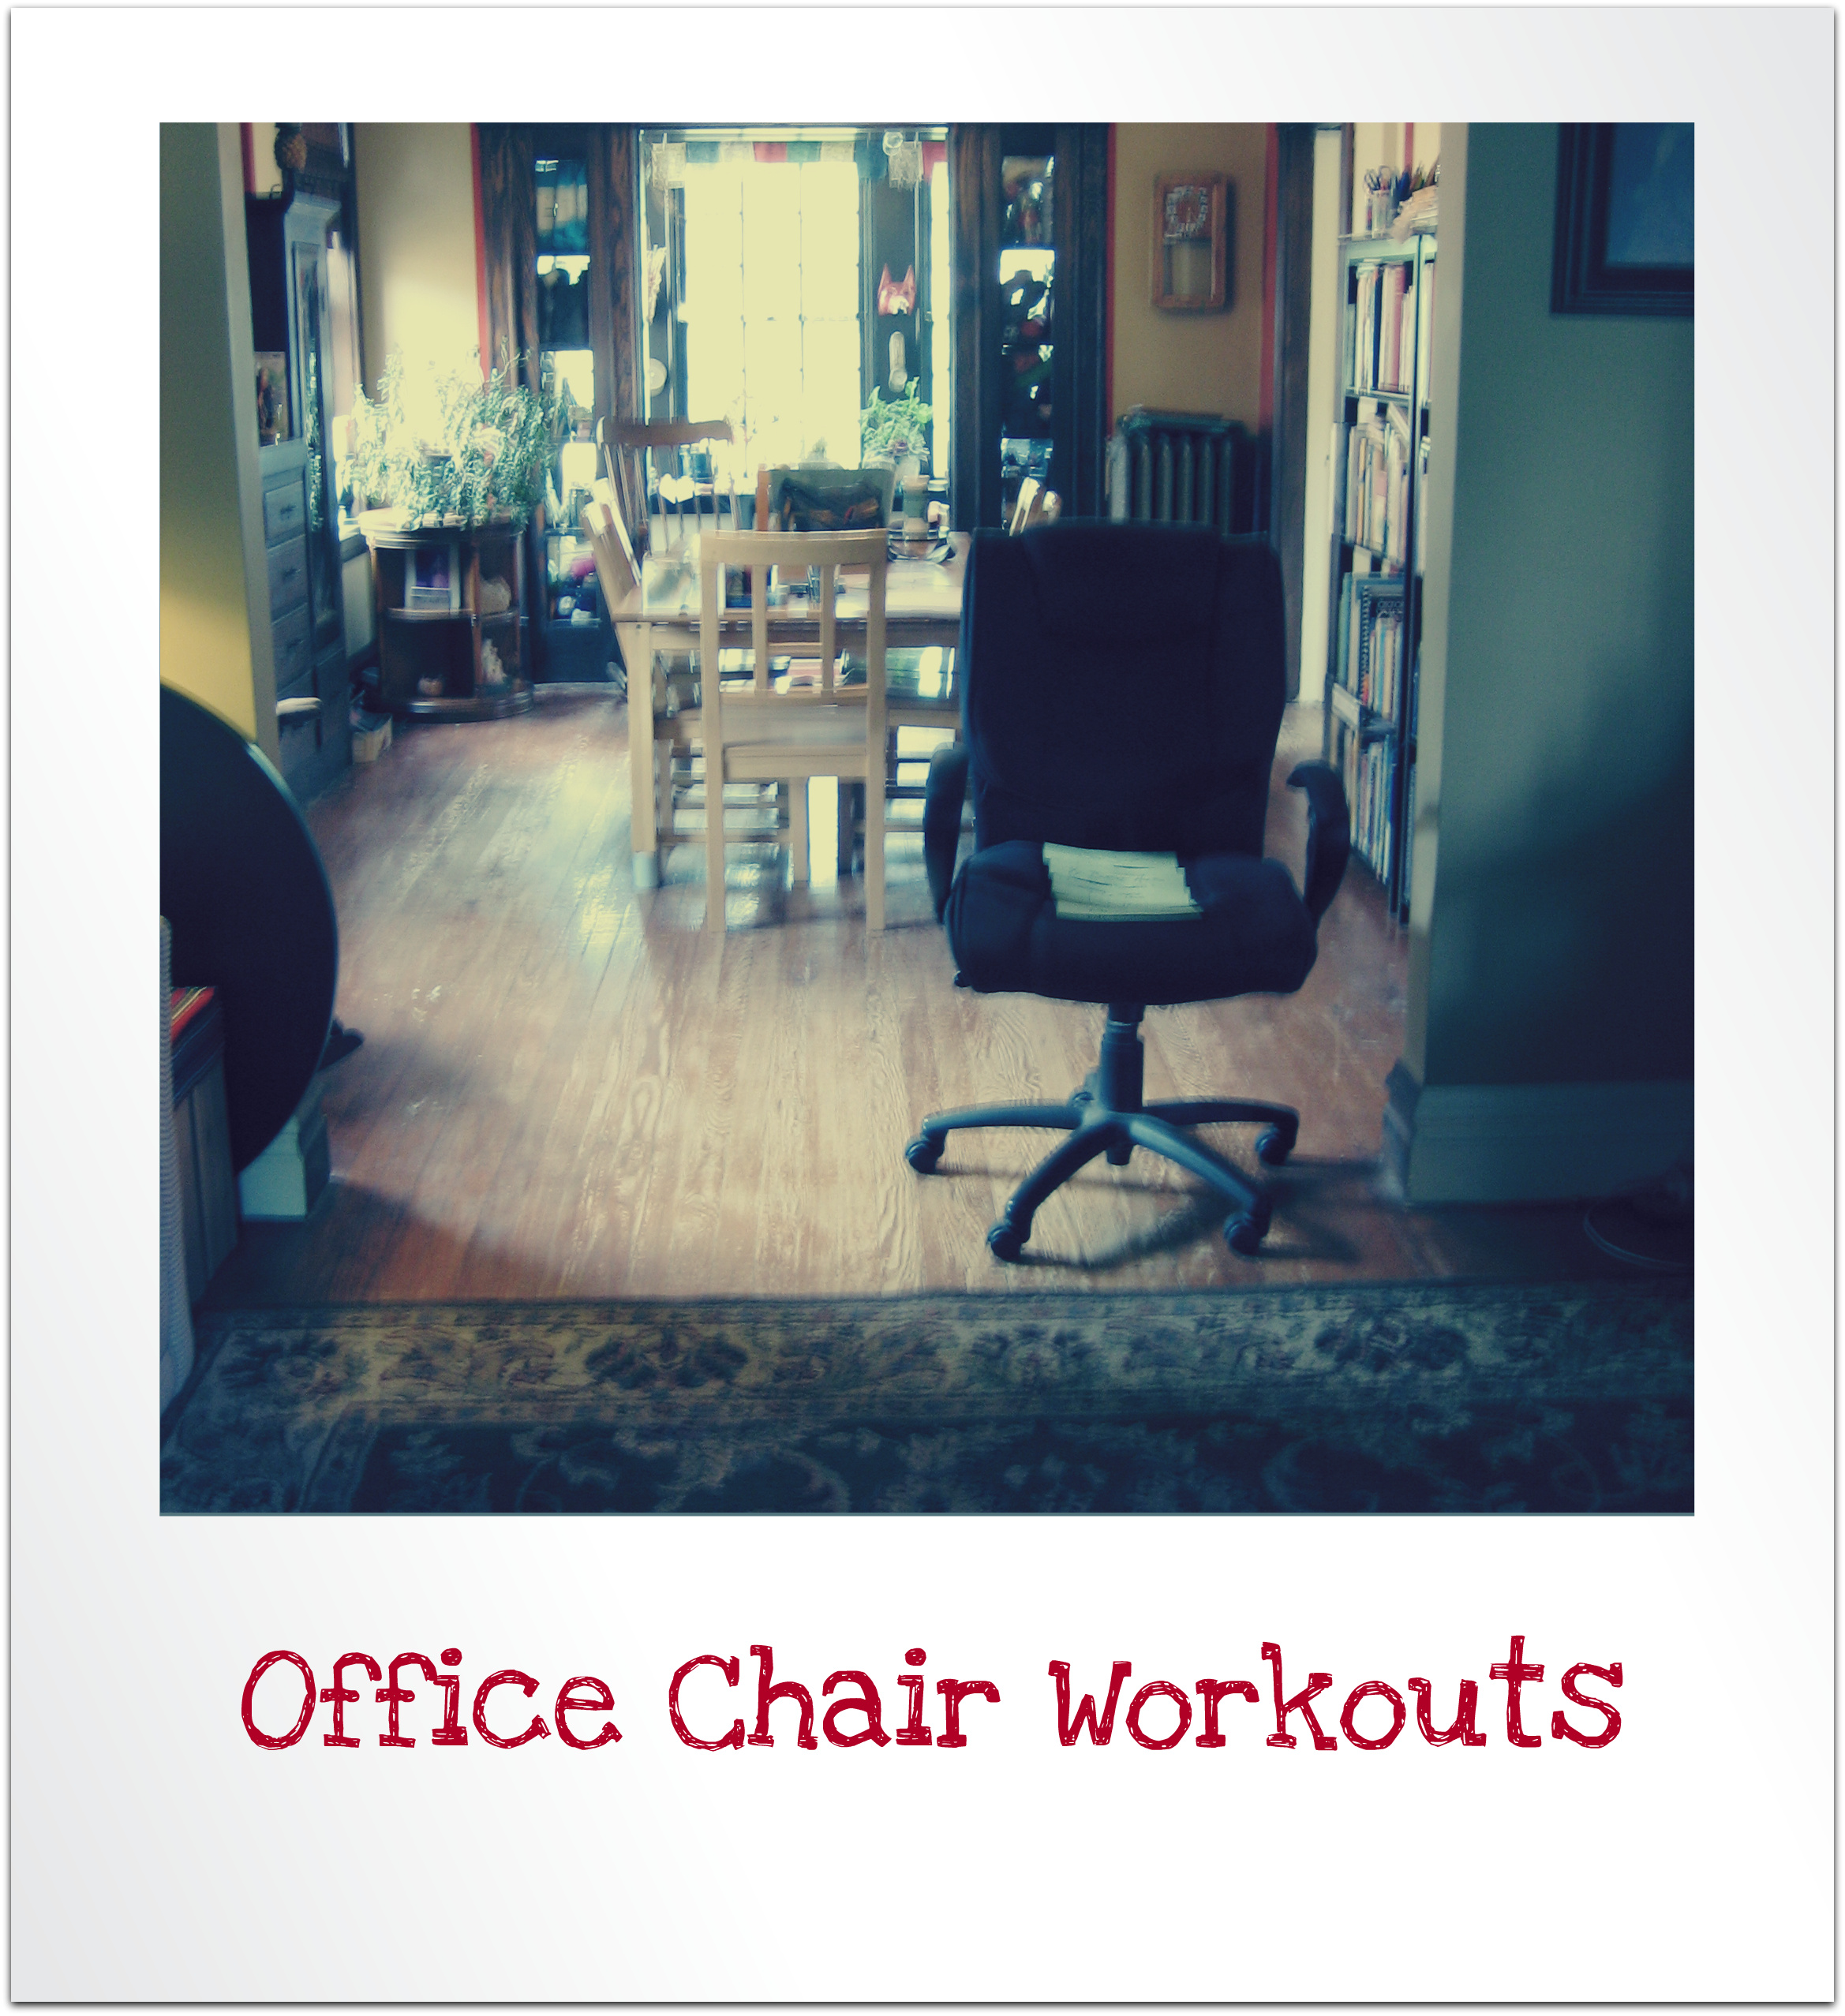 office-chair-workouts-8-8-2012-2-45-58-pm1.jpg